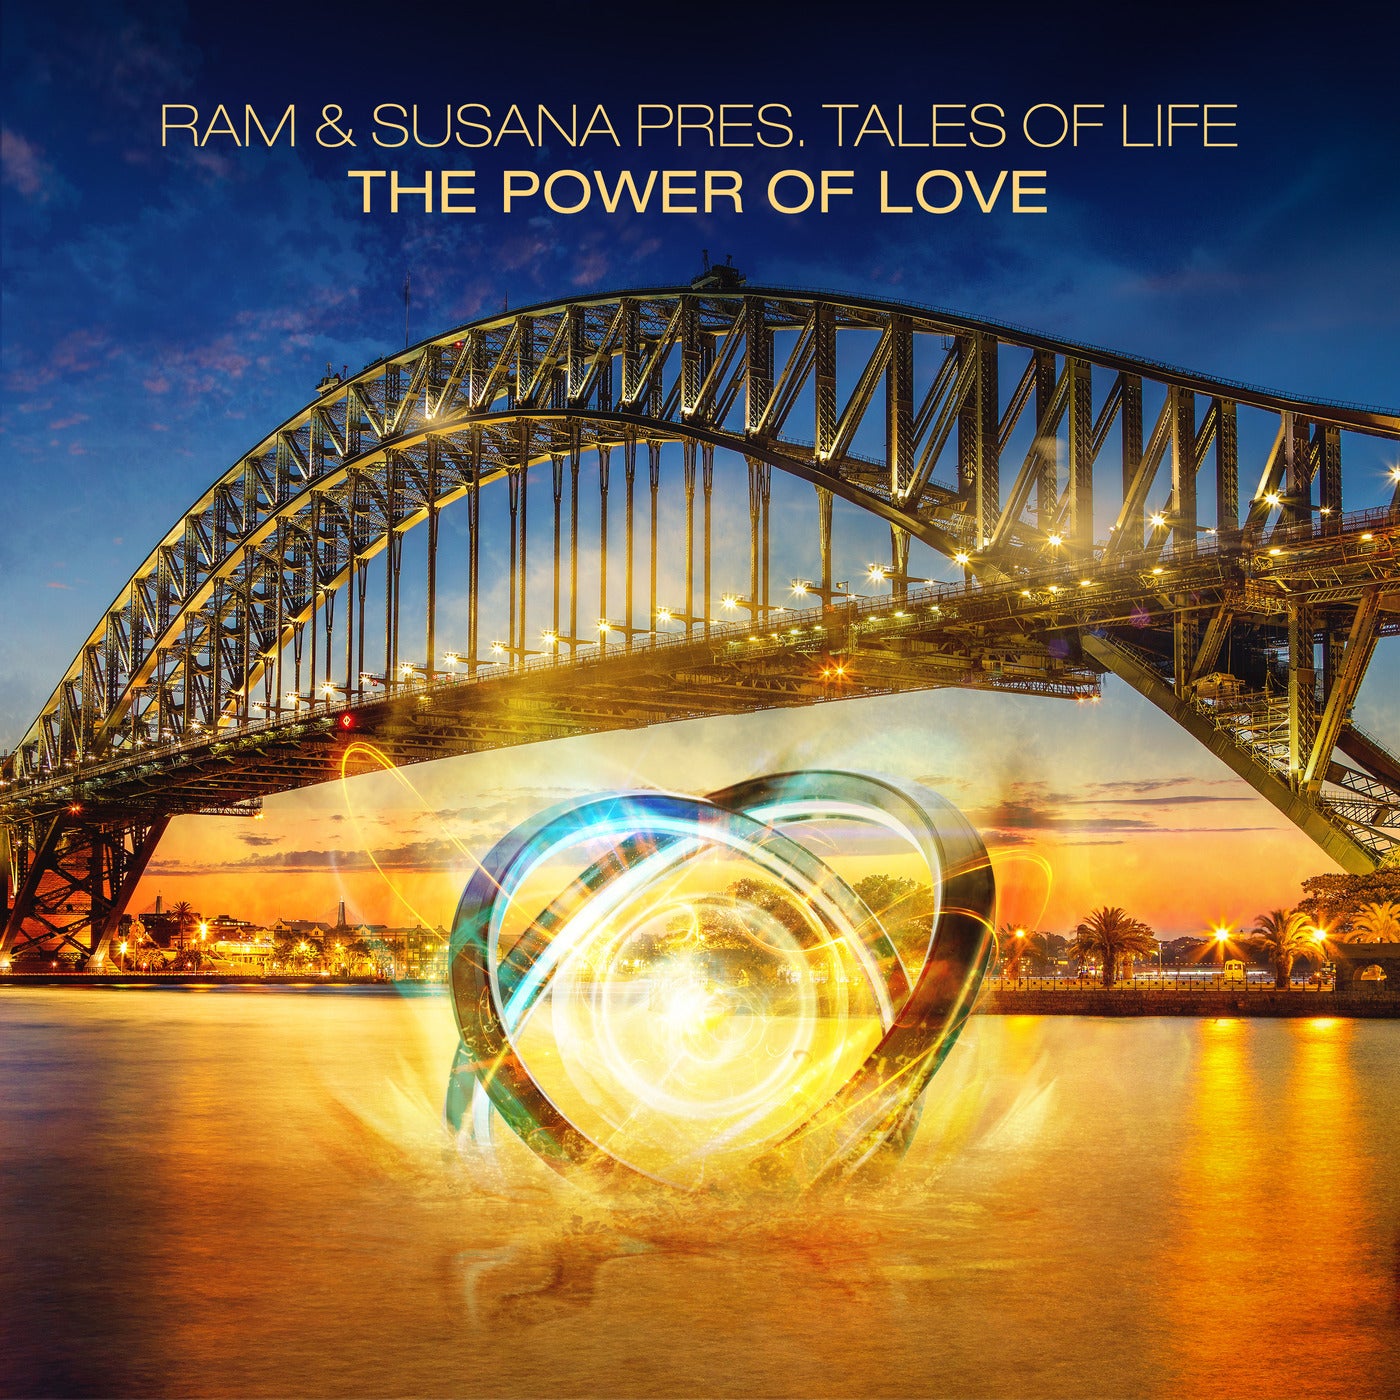 RAM & Susana present Tales of Life - The Power Of Love